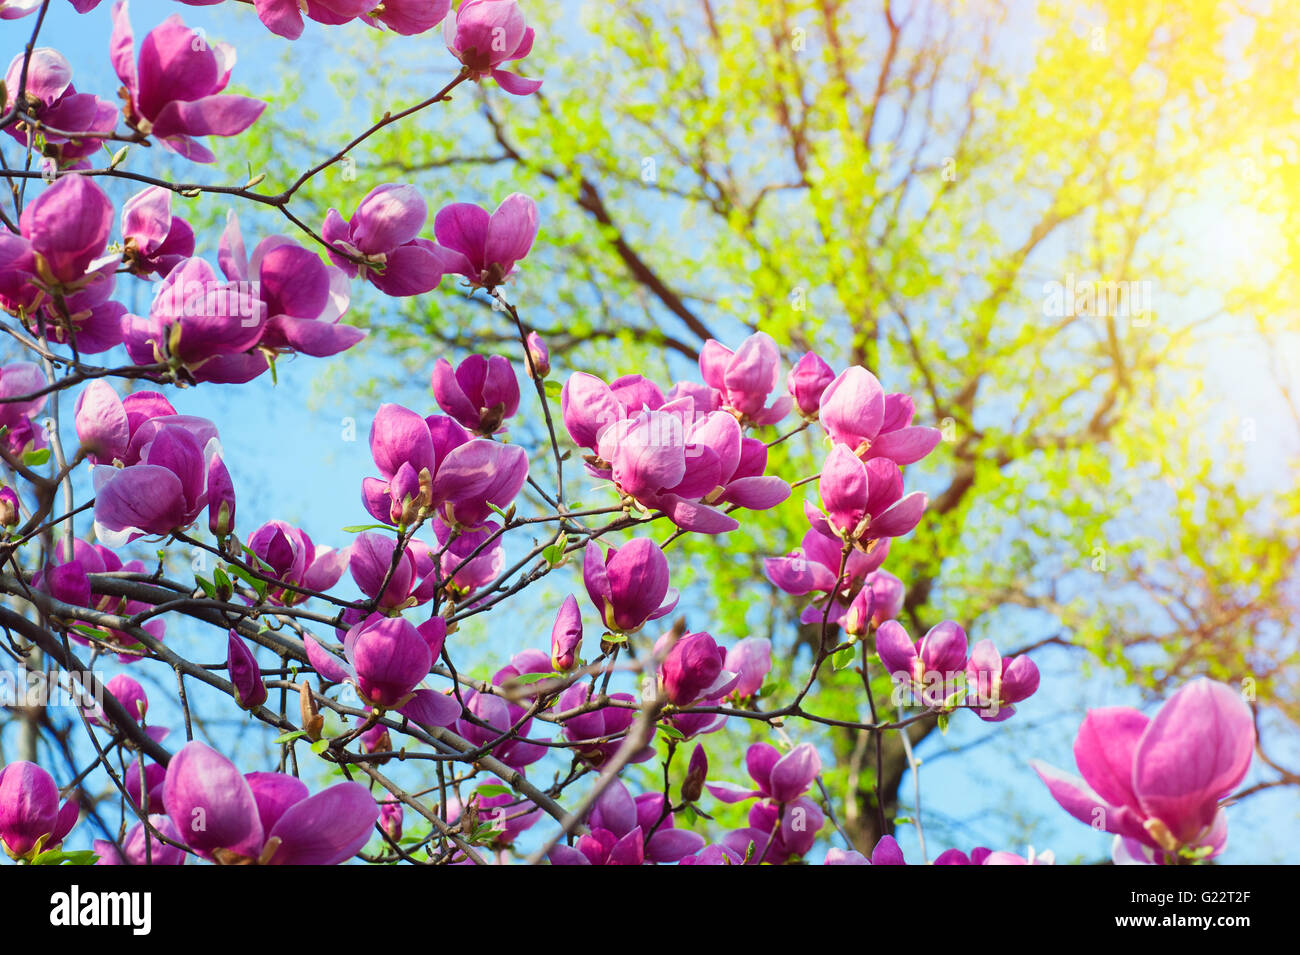 Bloomy magnolia tree with big pink flowers Stock Photo